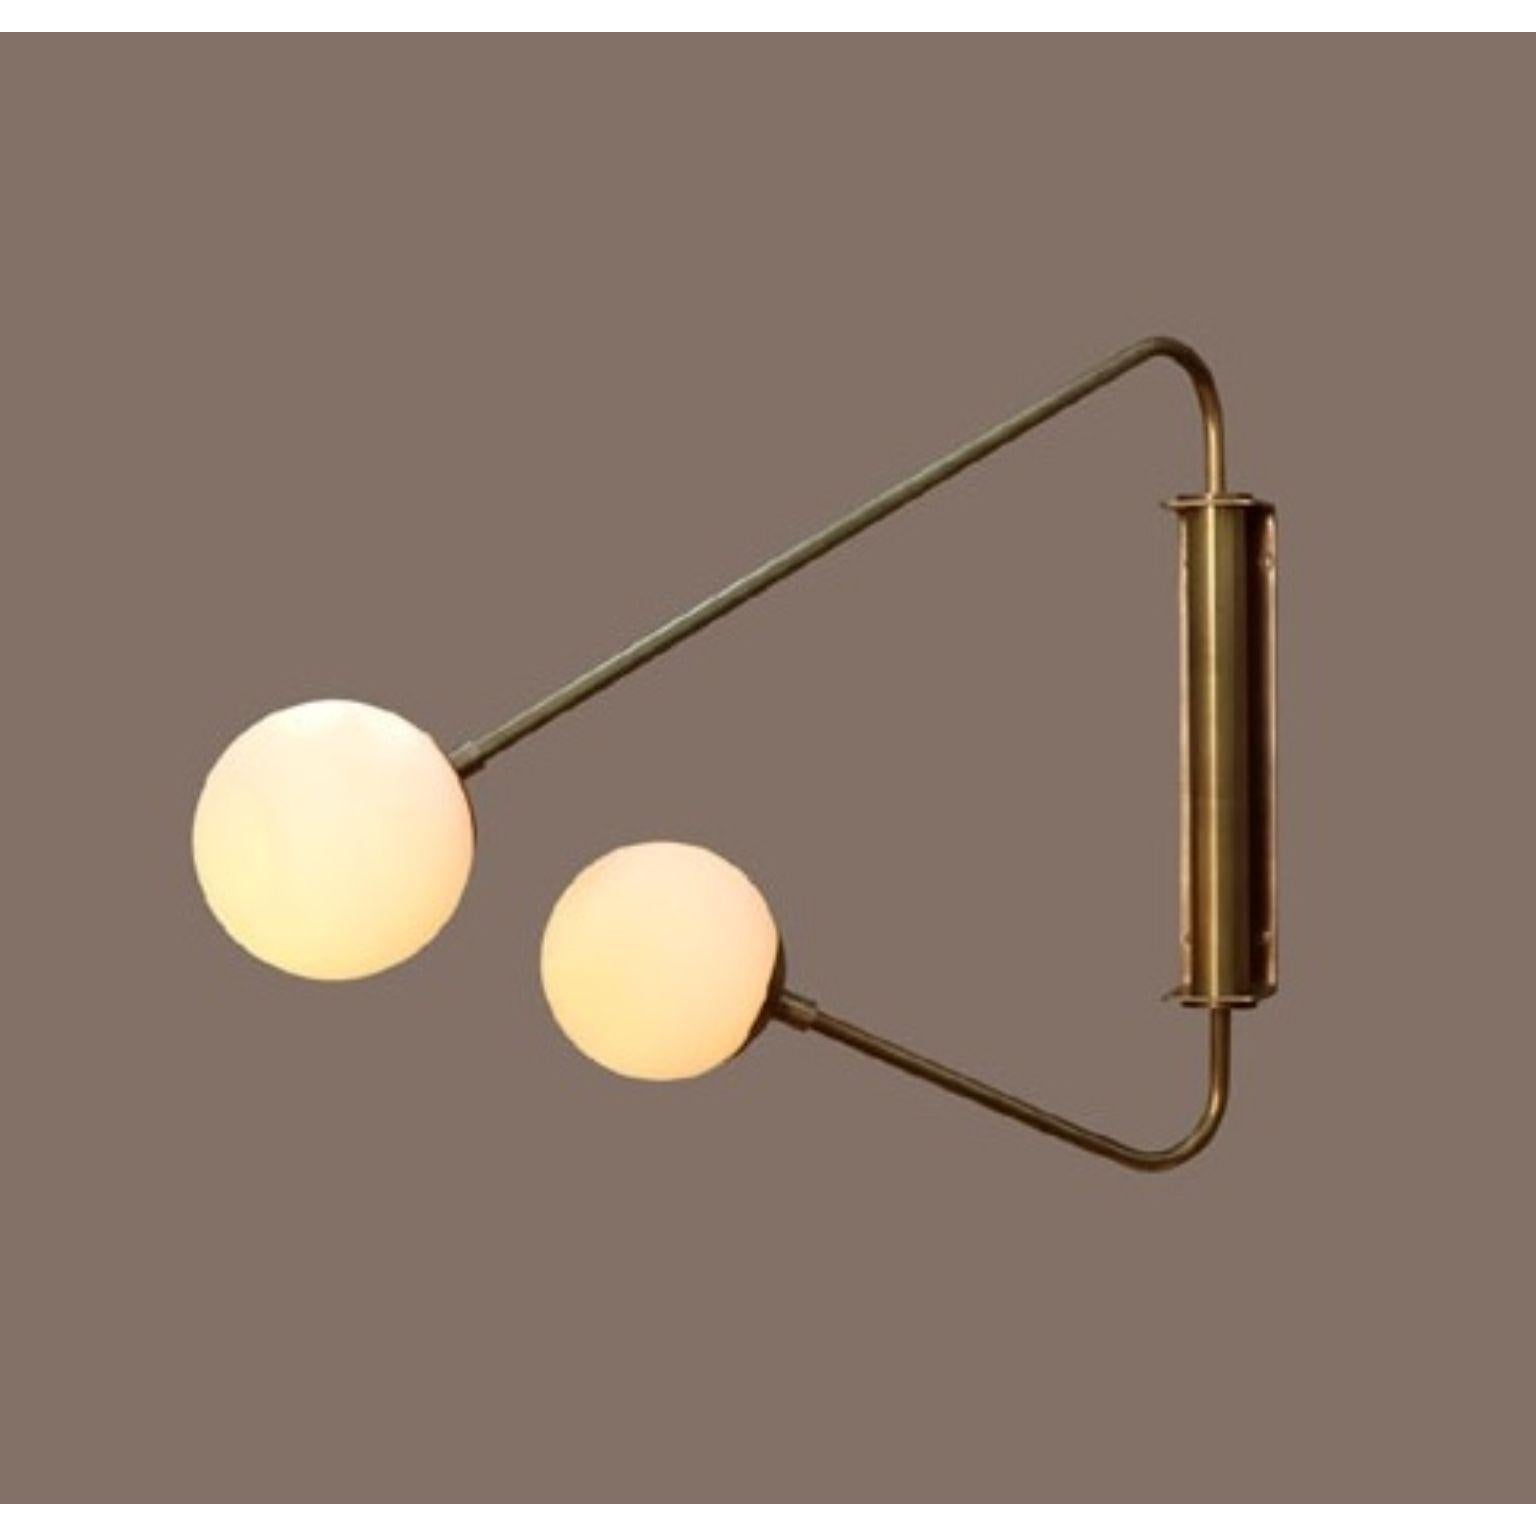 Float Two Arm Glass Globe Wall Sconce by Lamp Shaper
Dimensions: D 117 x W 81.5 x H 53.5 cm.
Materials: Brass and glass.

Different finishes available: raw brass, aged brass, burnt brass and brushed brass Please contact us.

All our lamps can be